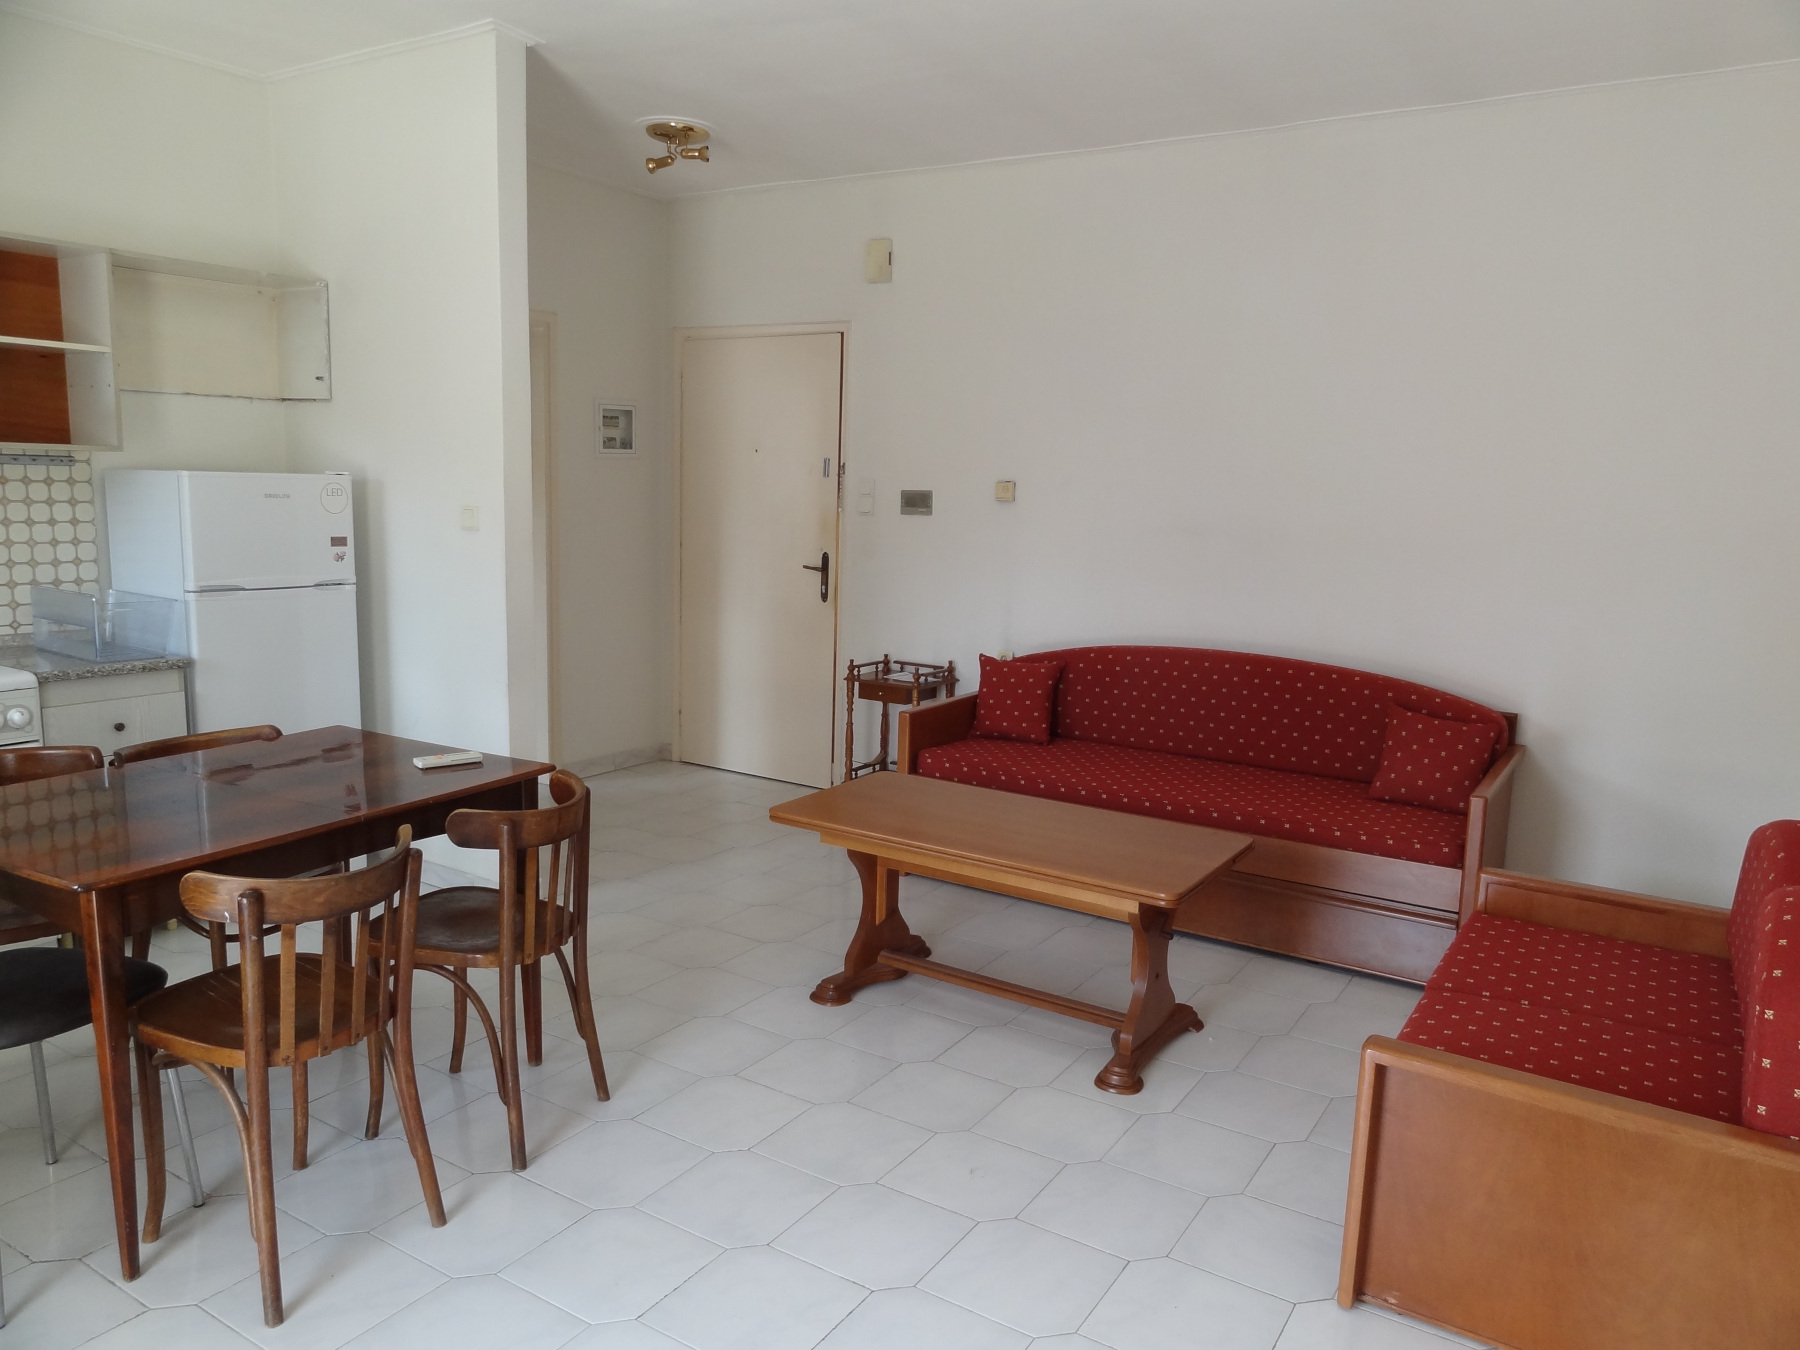 For rent furnished 1 bedroom apartment of 45 sq.m. 1st floor near the bus station in Ioannina